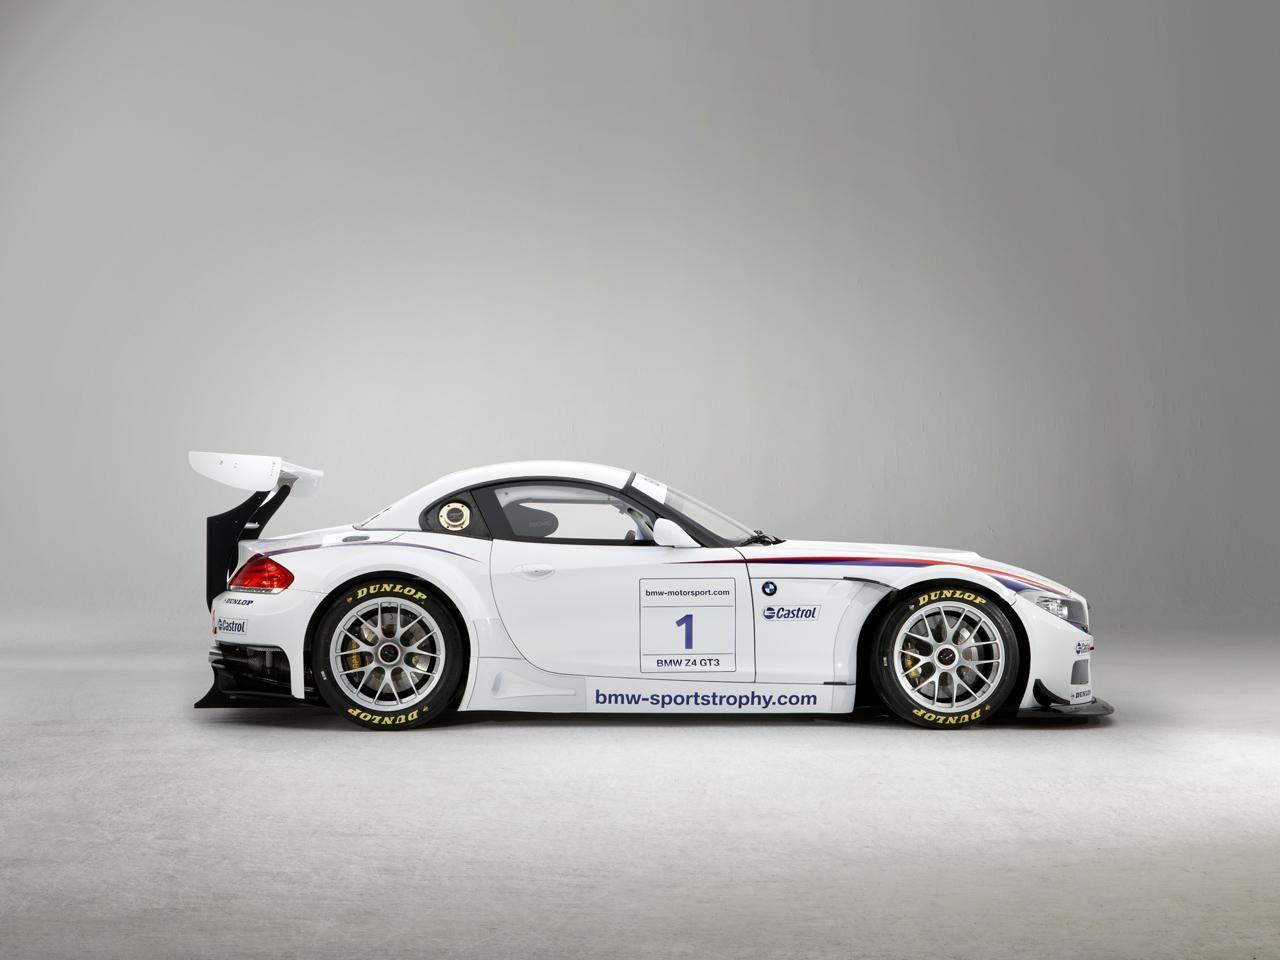 BMW Z4 GT3 Picture, News, Research, Pricing, msrp, invoice